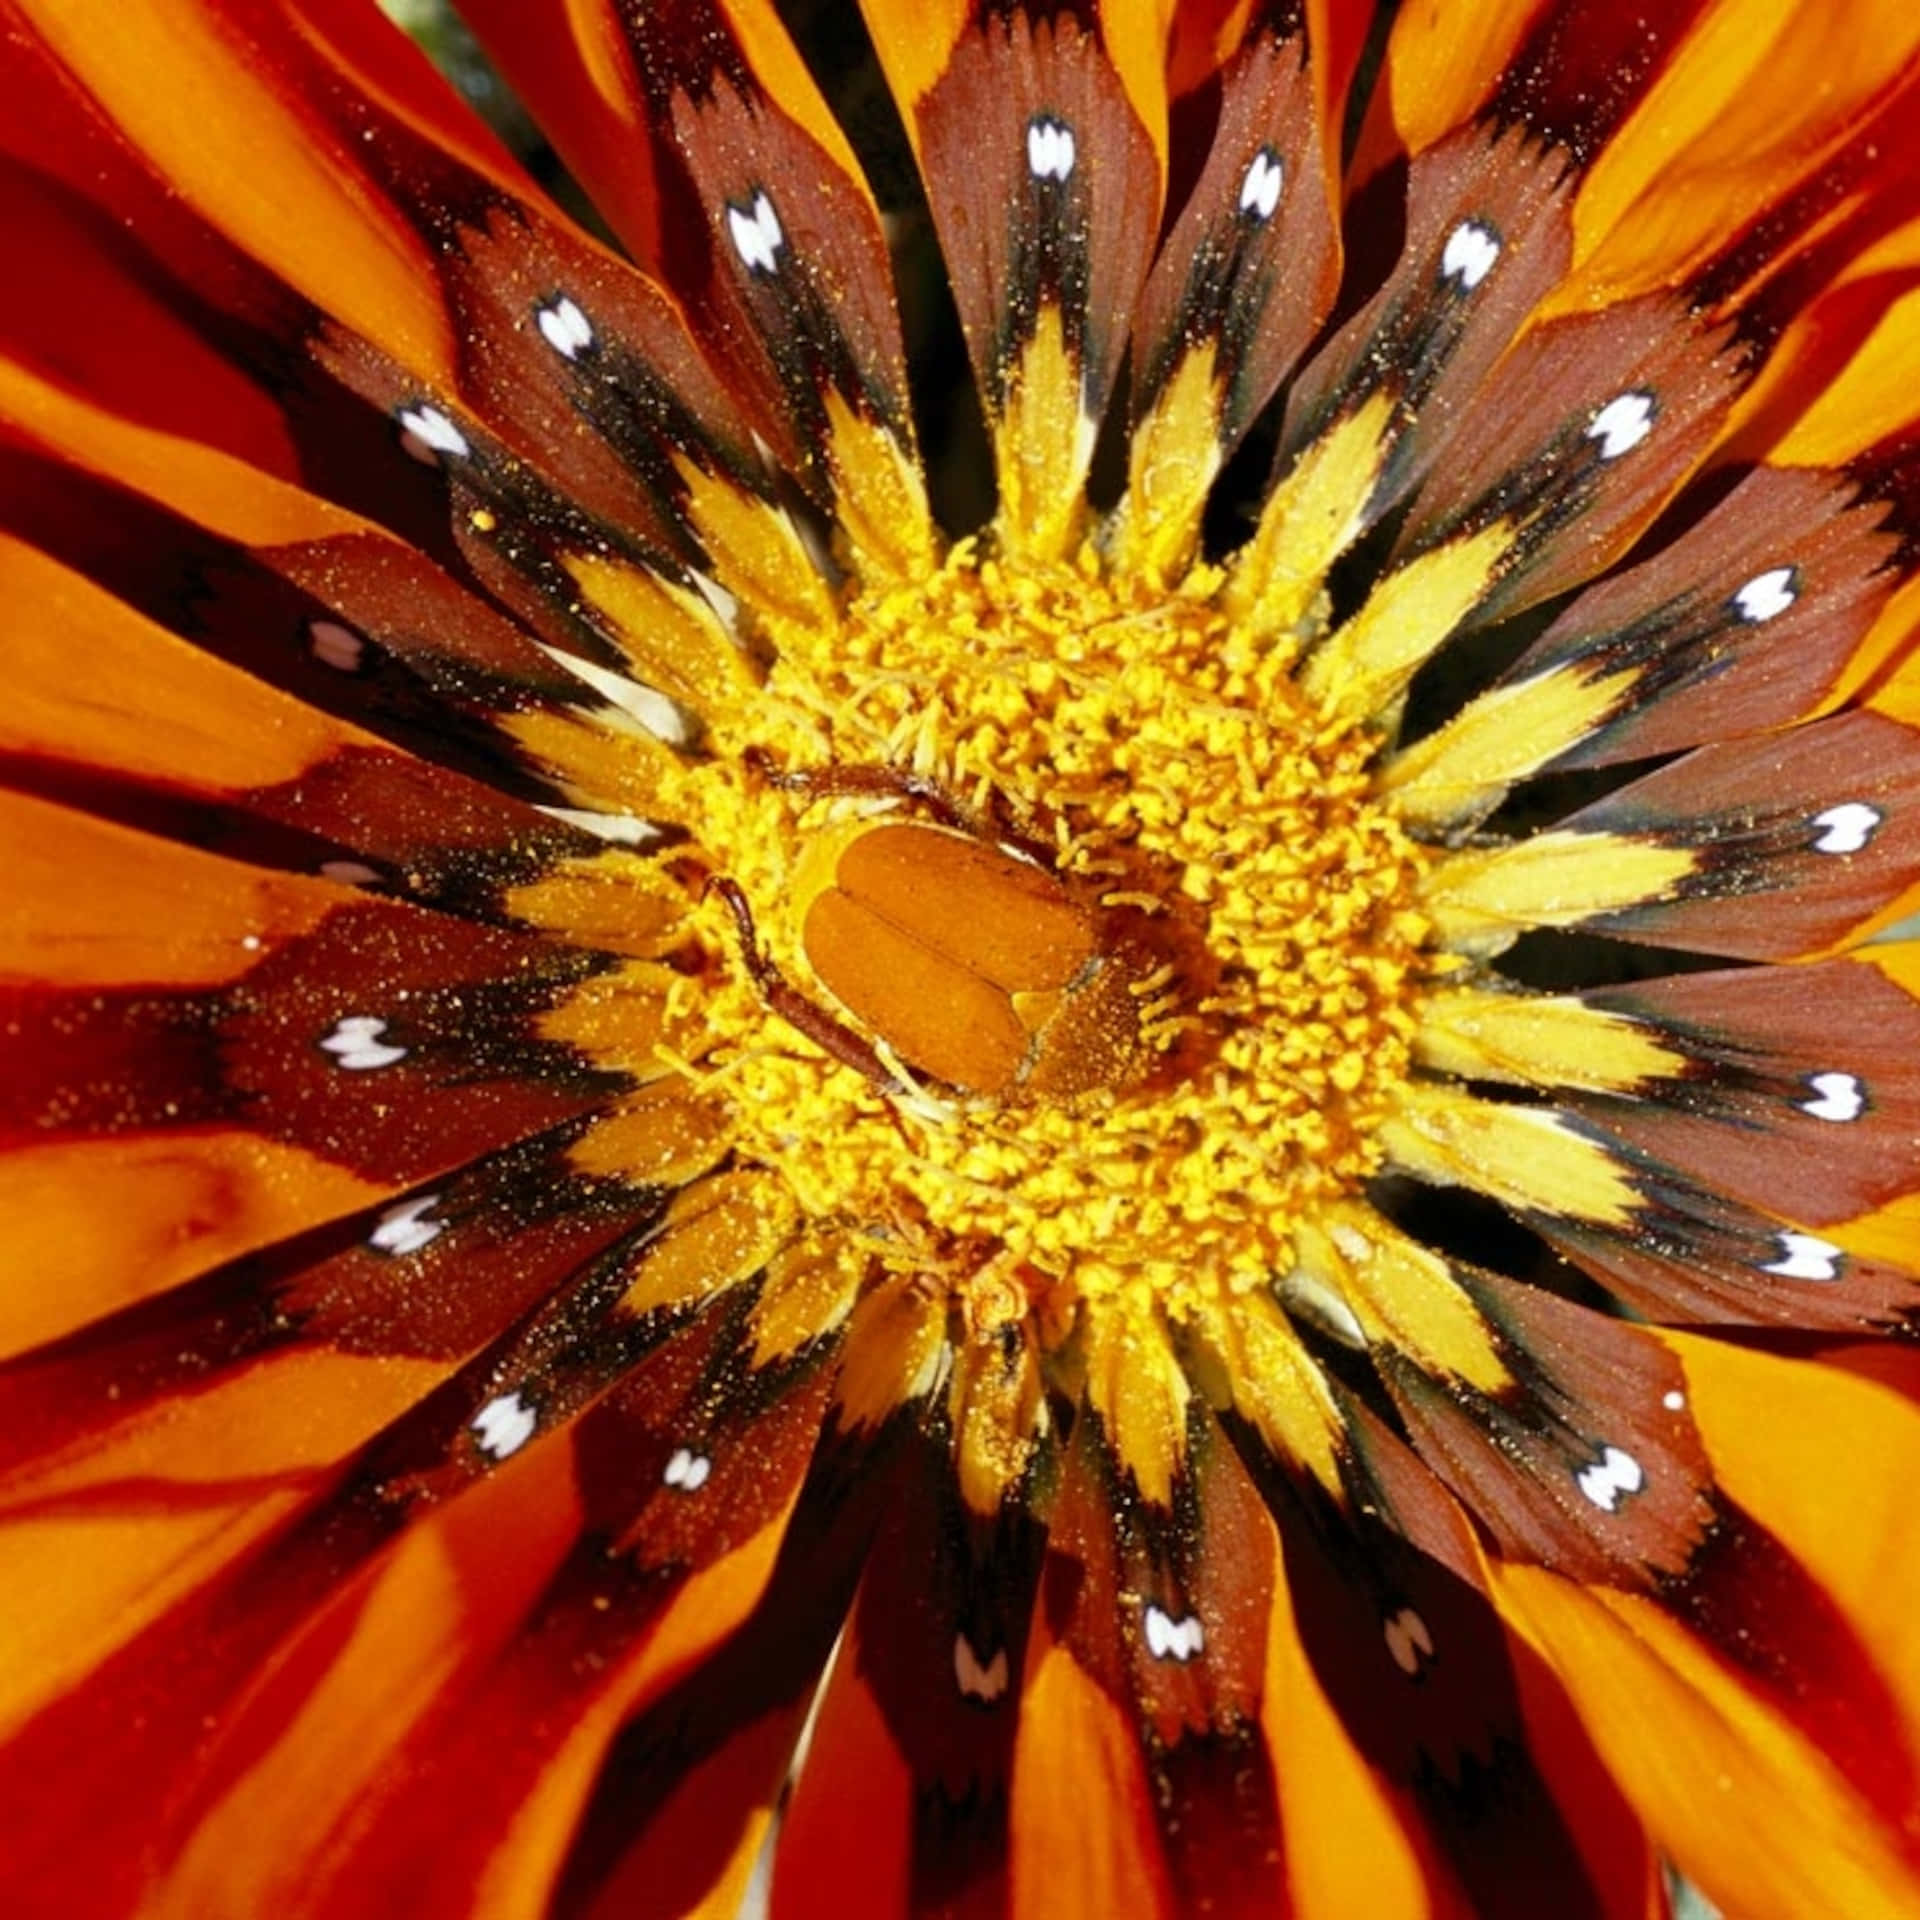 A close-up of a tenacious flower blooming from a slender brown stem